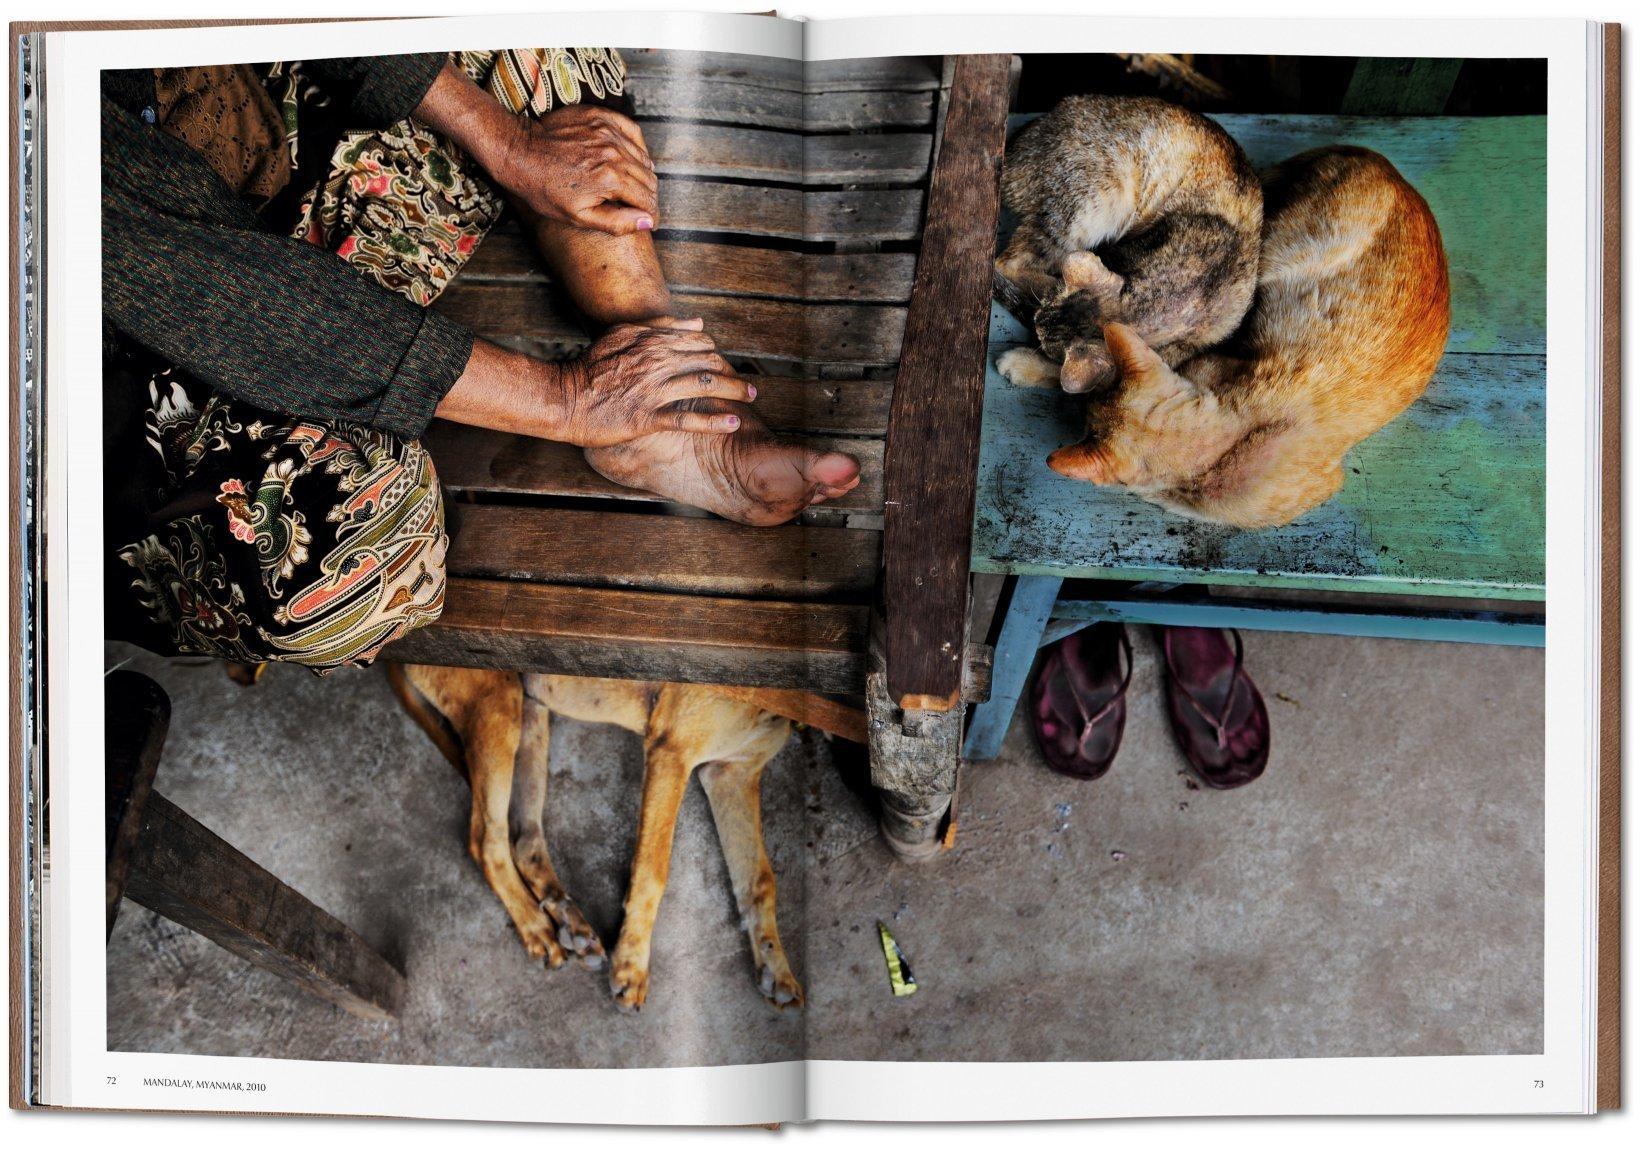 Contemporary Steve McCurry, Animals, Art Edition No. 1-100 ‘Chiang Mai, Thailand, 2010’ For Sale